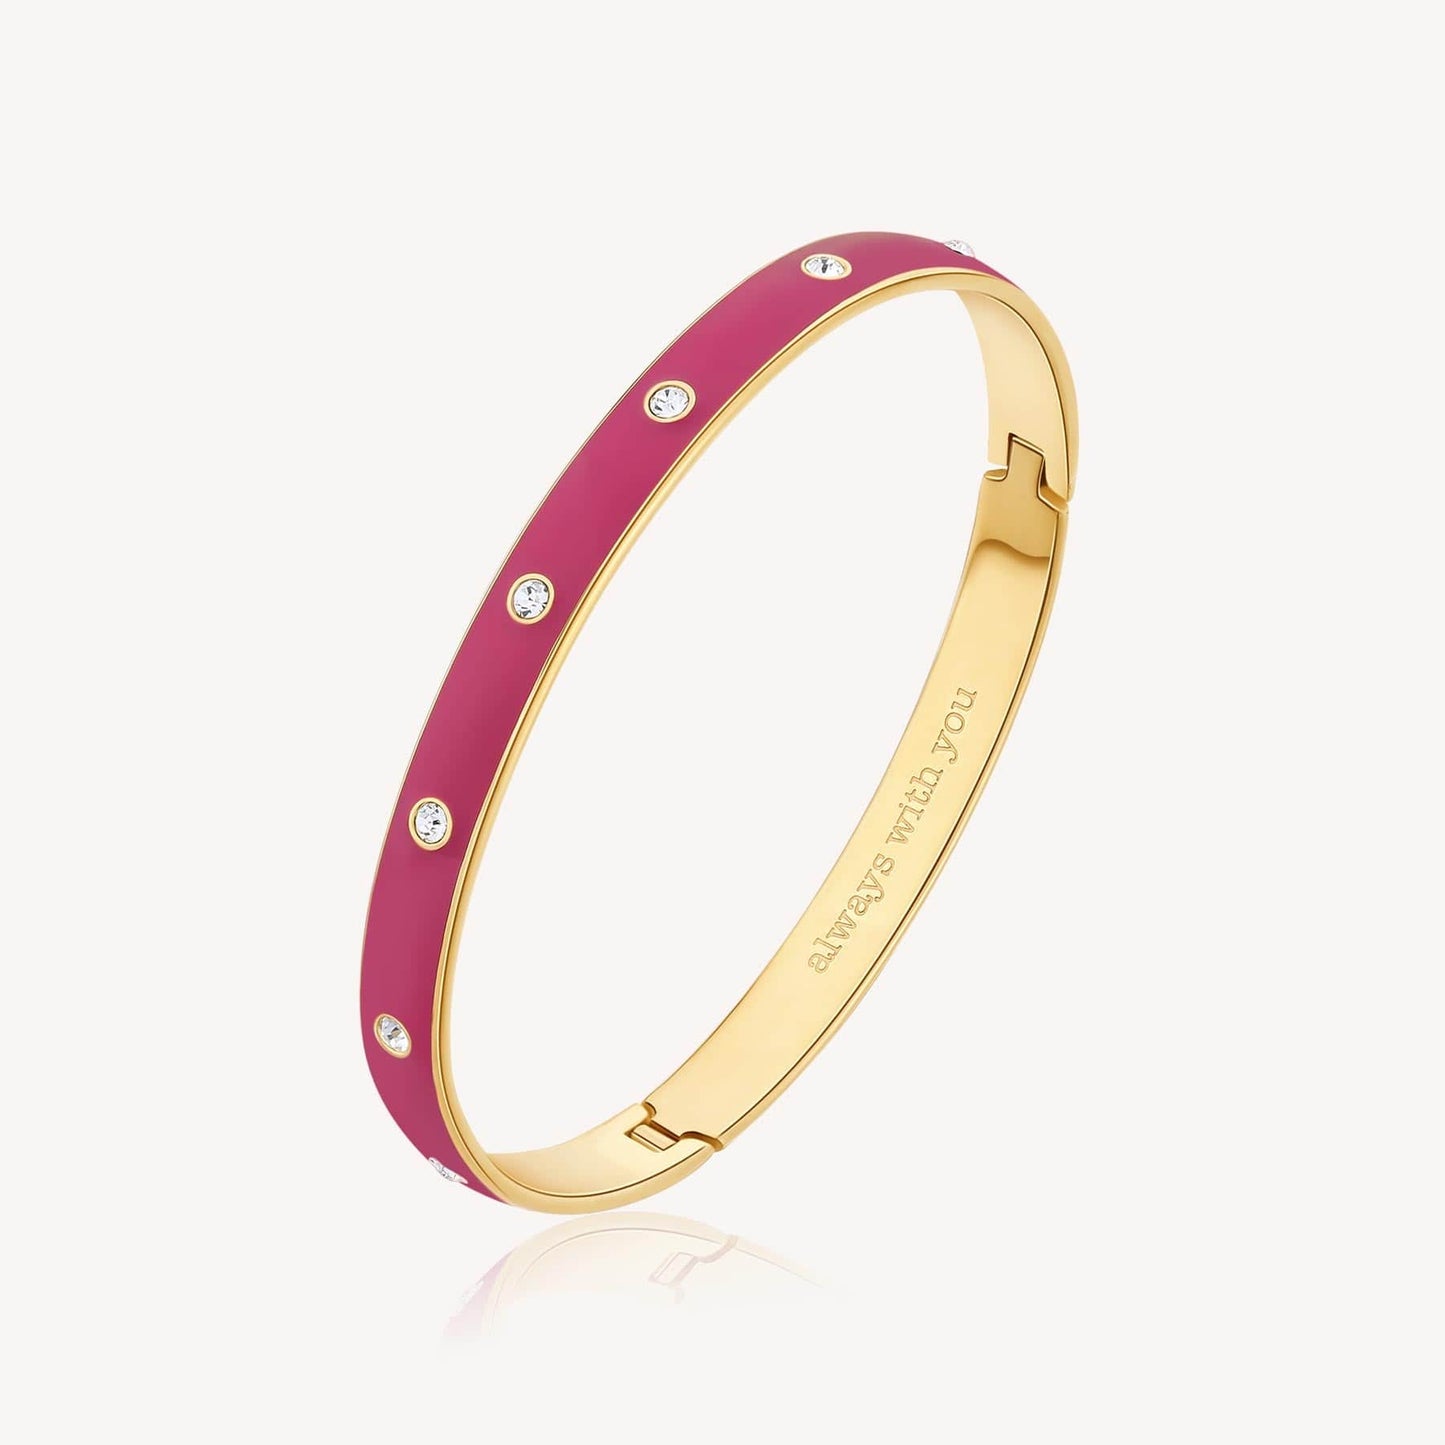 BRC-SS Stainless Steel Gold Tone Latching Bangle with Fuchsia Enamel